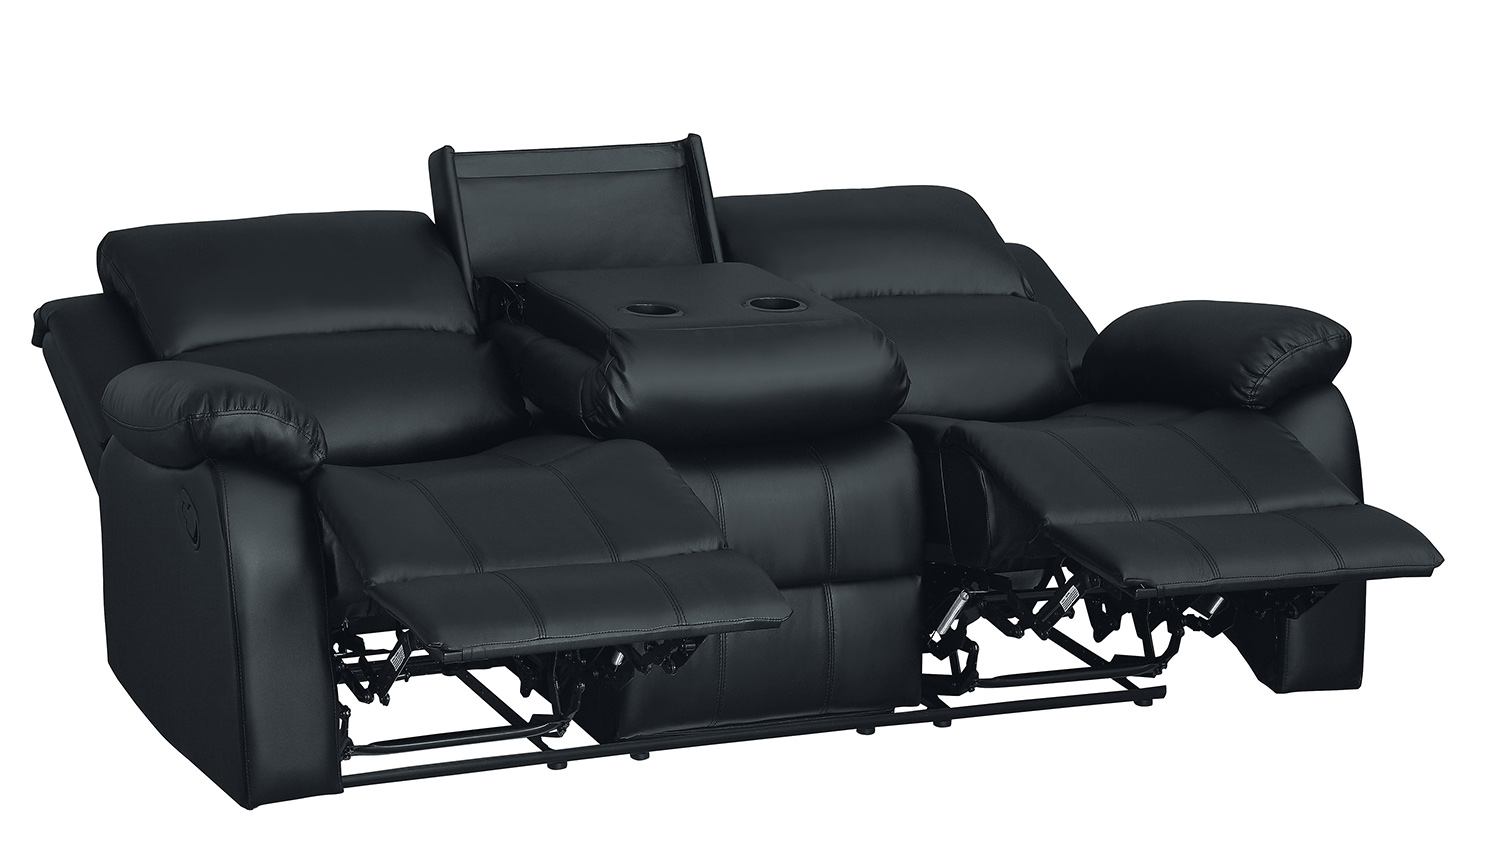 Homelegance Clarkdale Double Reclining Sofa With Center Drop-Down Cup Holders - Black